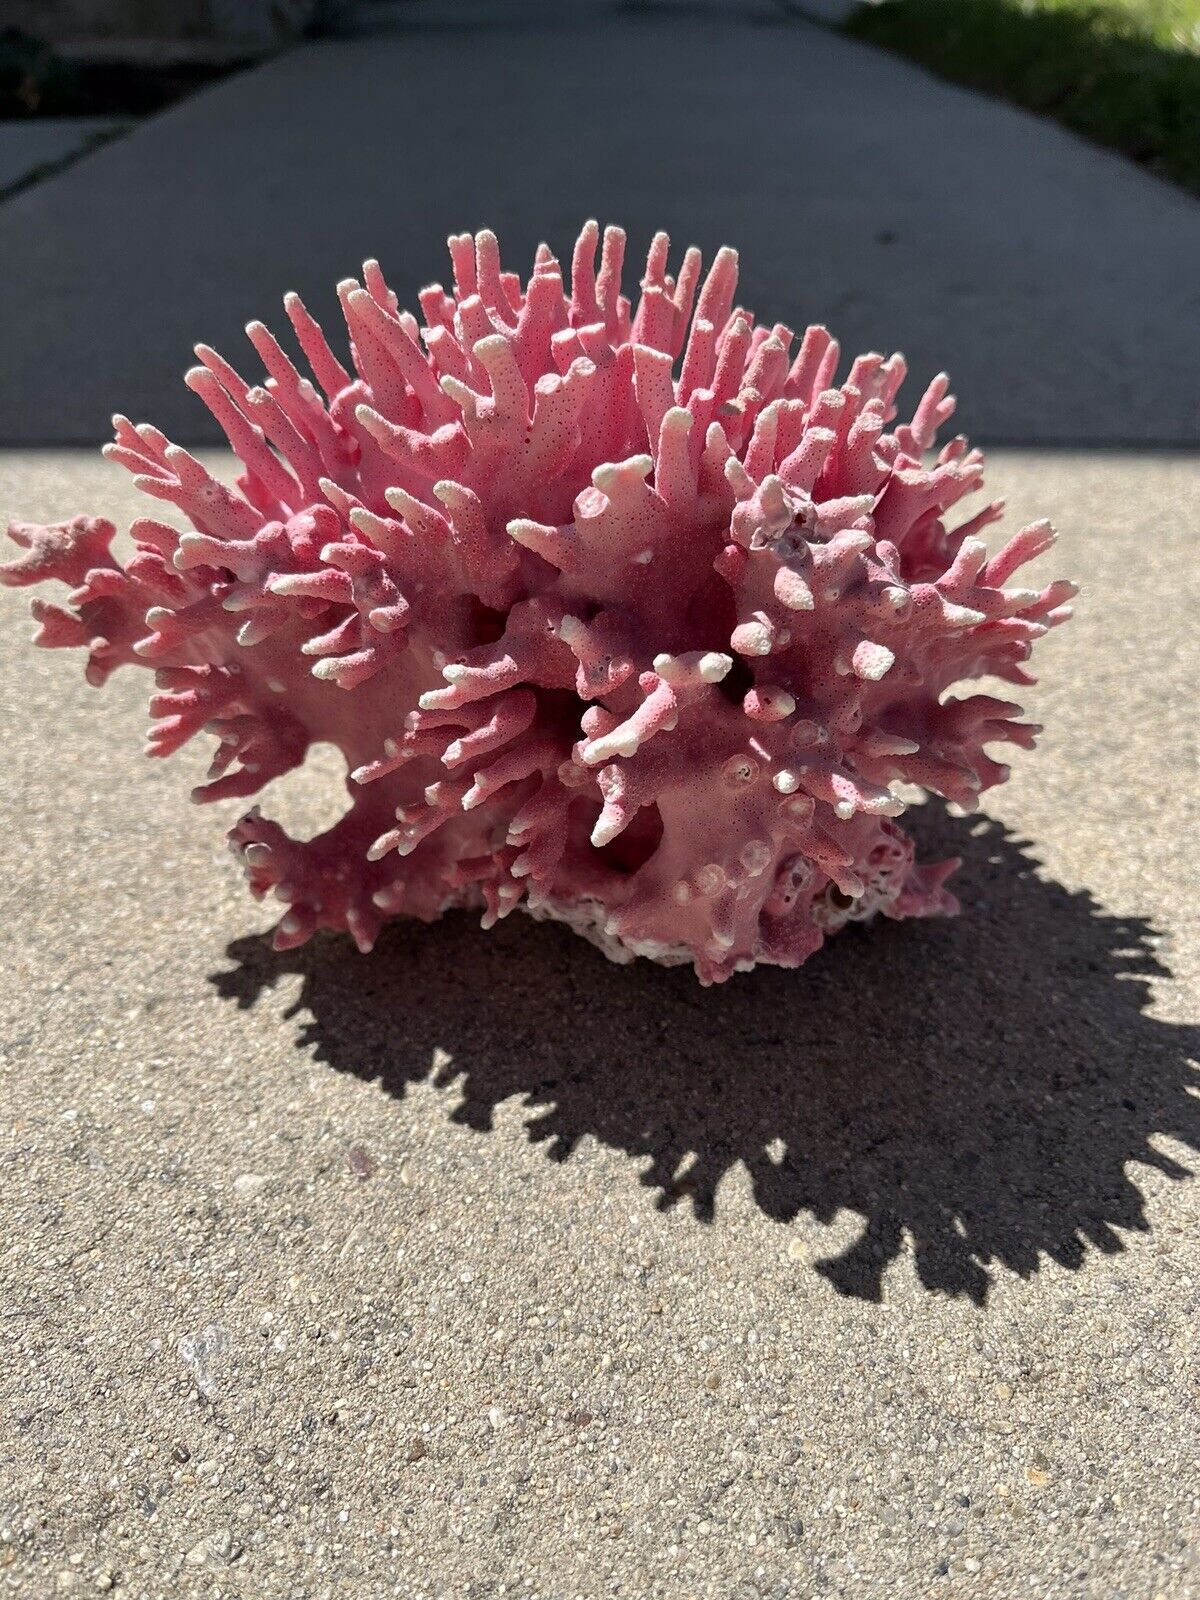 Extremely Rare Natural Allopora California Hydrocoral ( Pink Coral) 9” X 6”